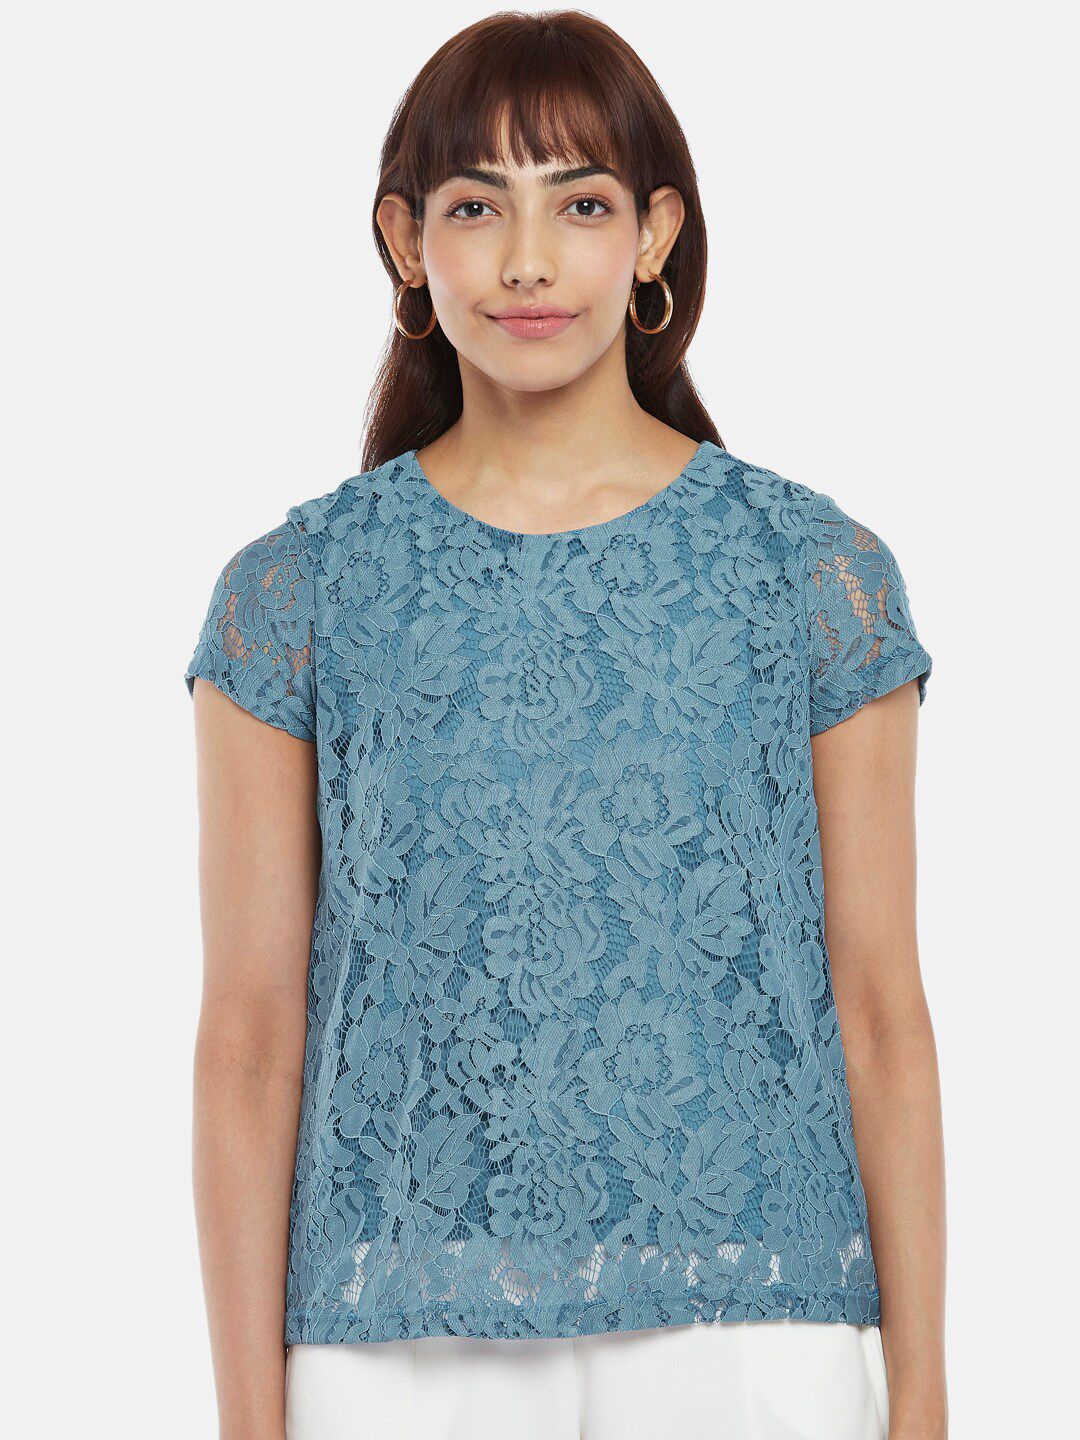 Honey by Pantaloons Blue Floral Embroidered Lace Top Price in India